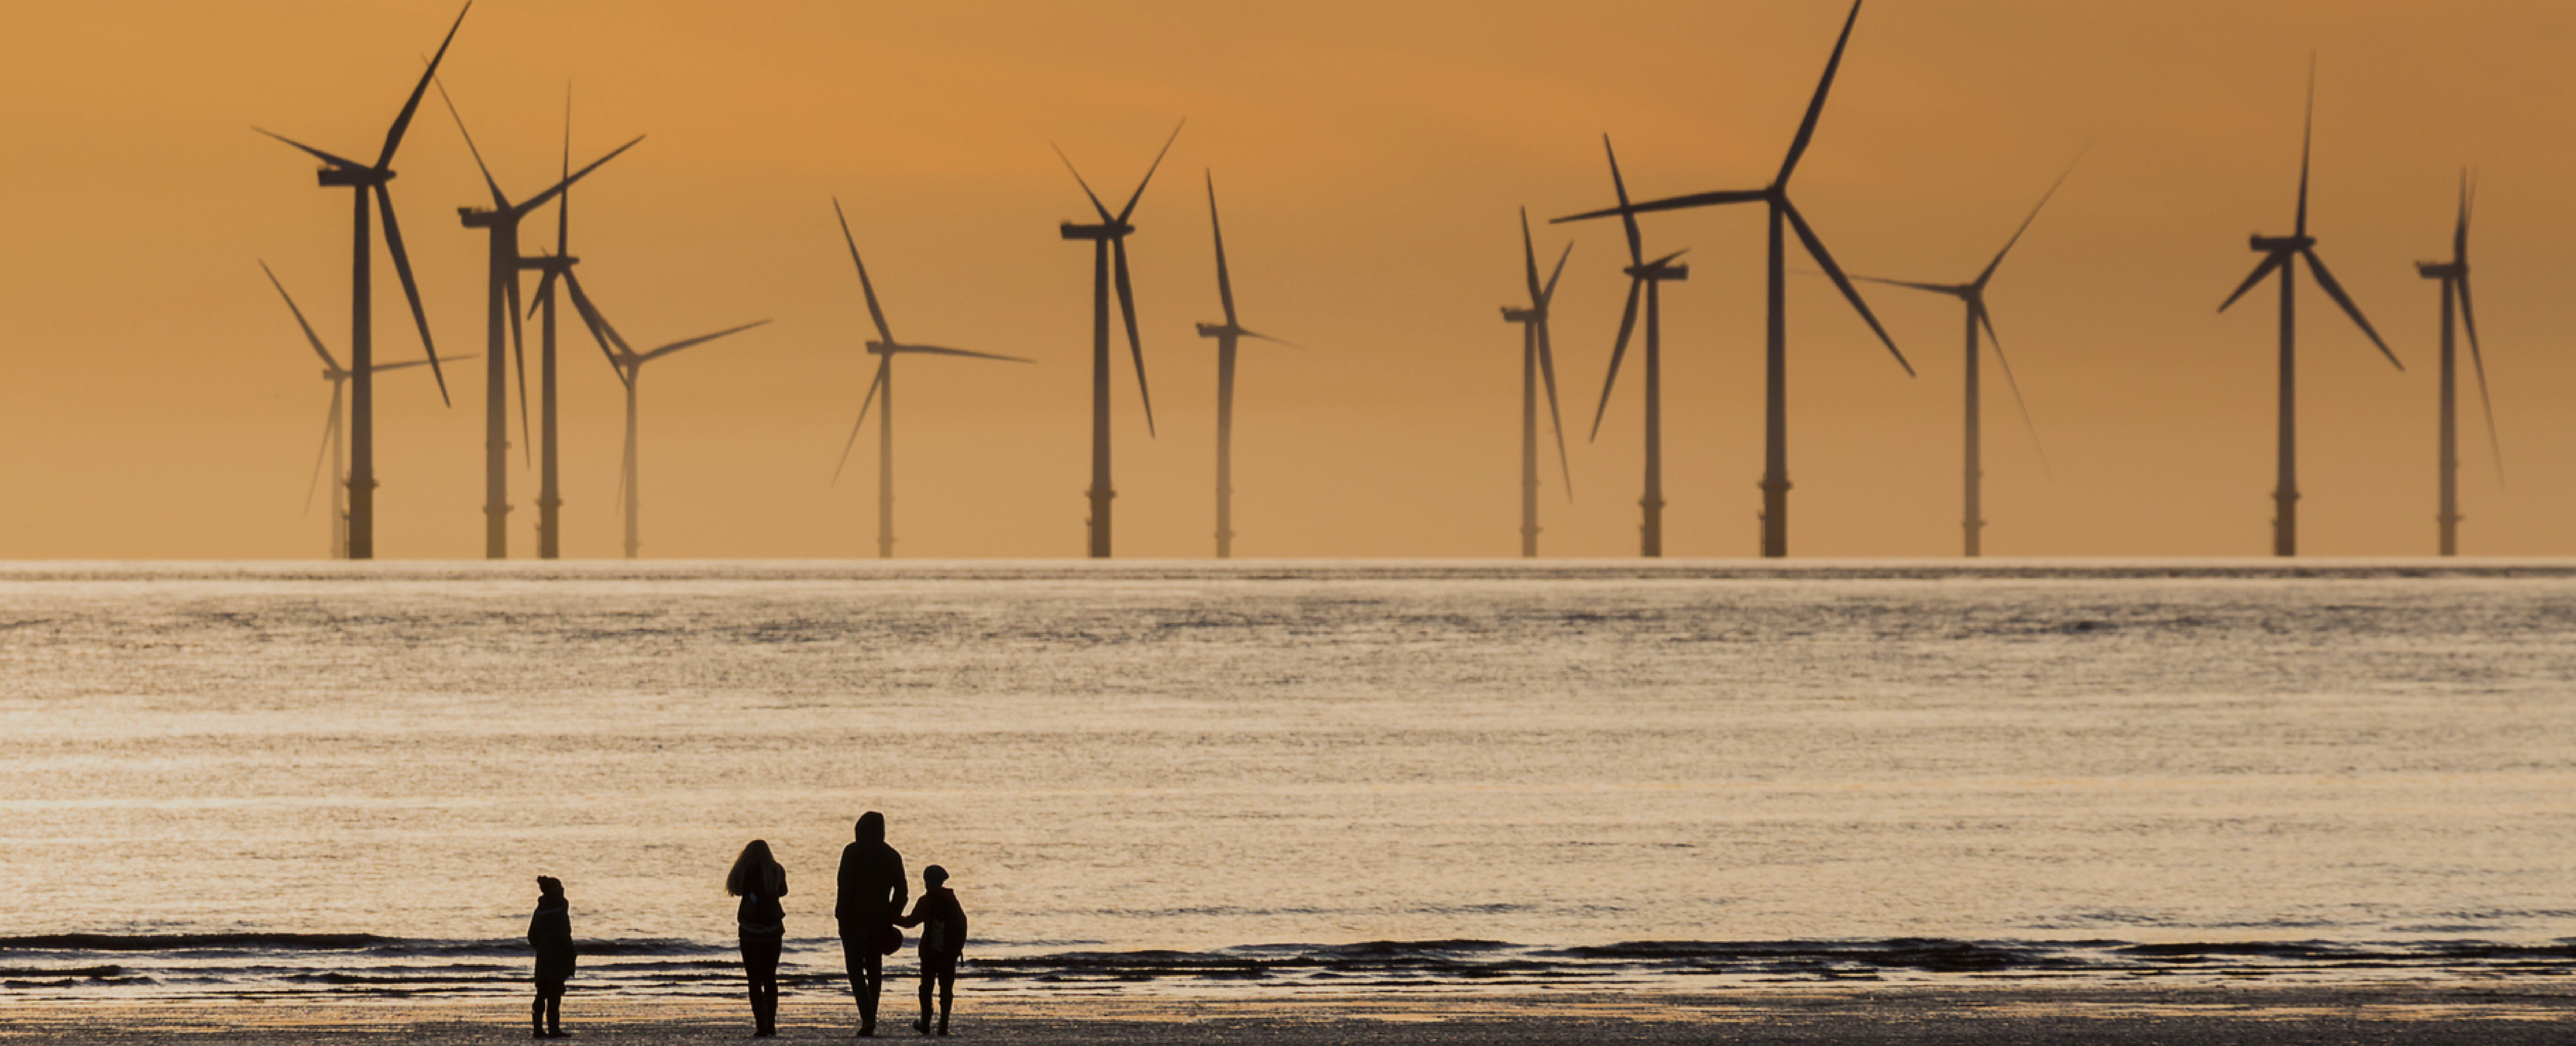 Offshore wind turbine viewed from a beach